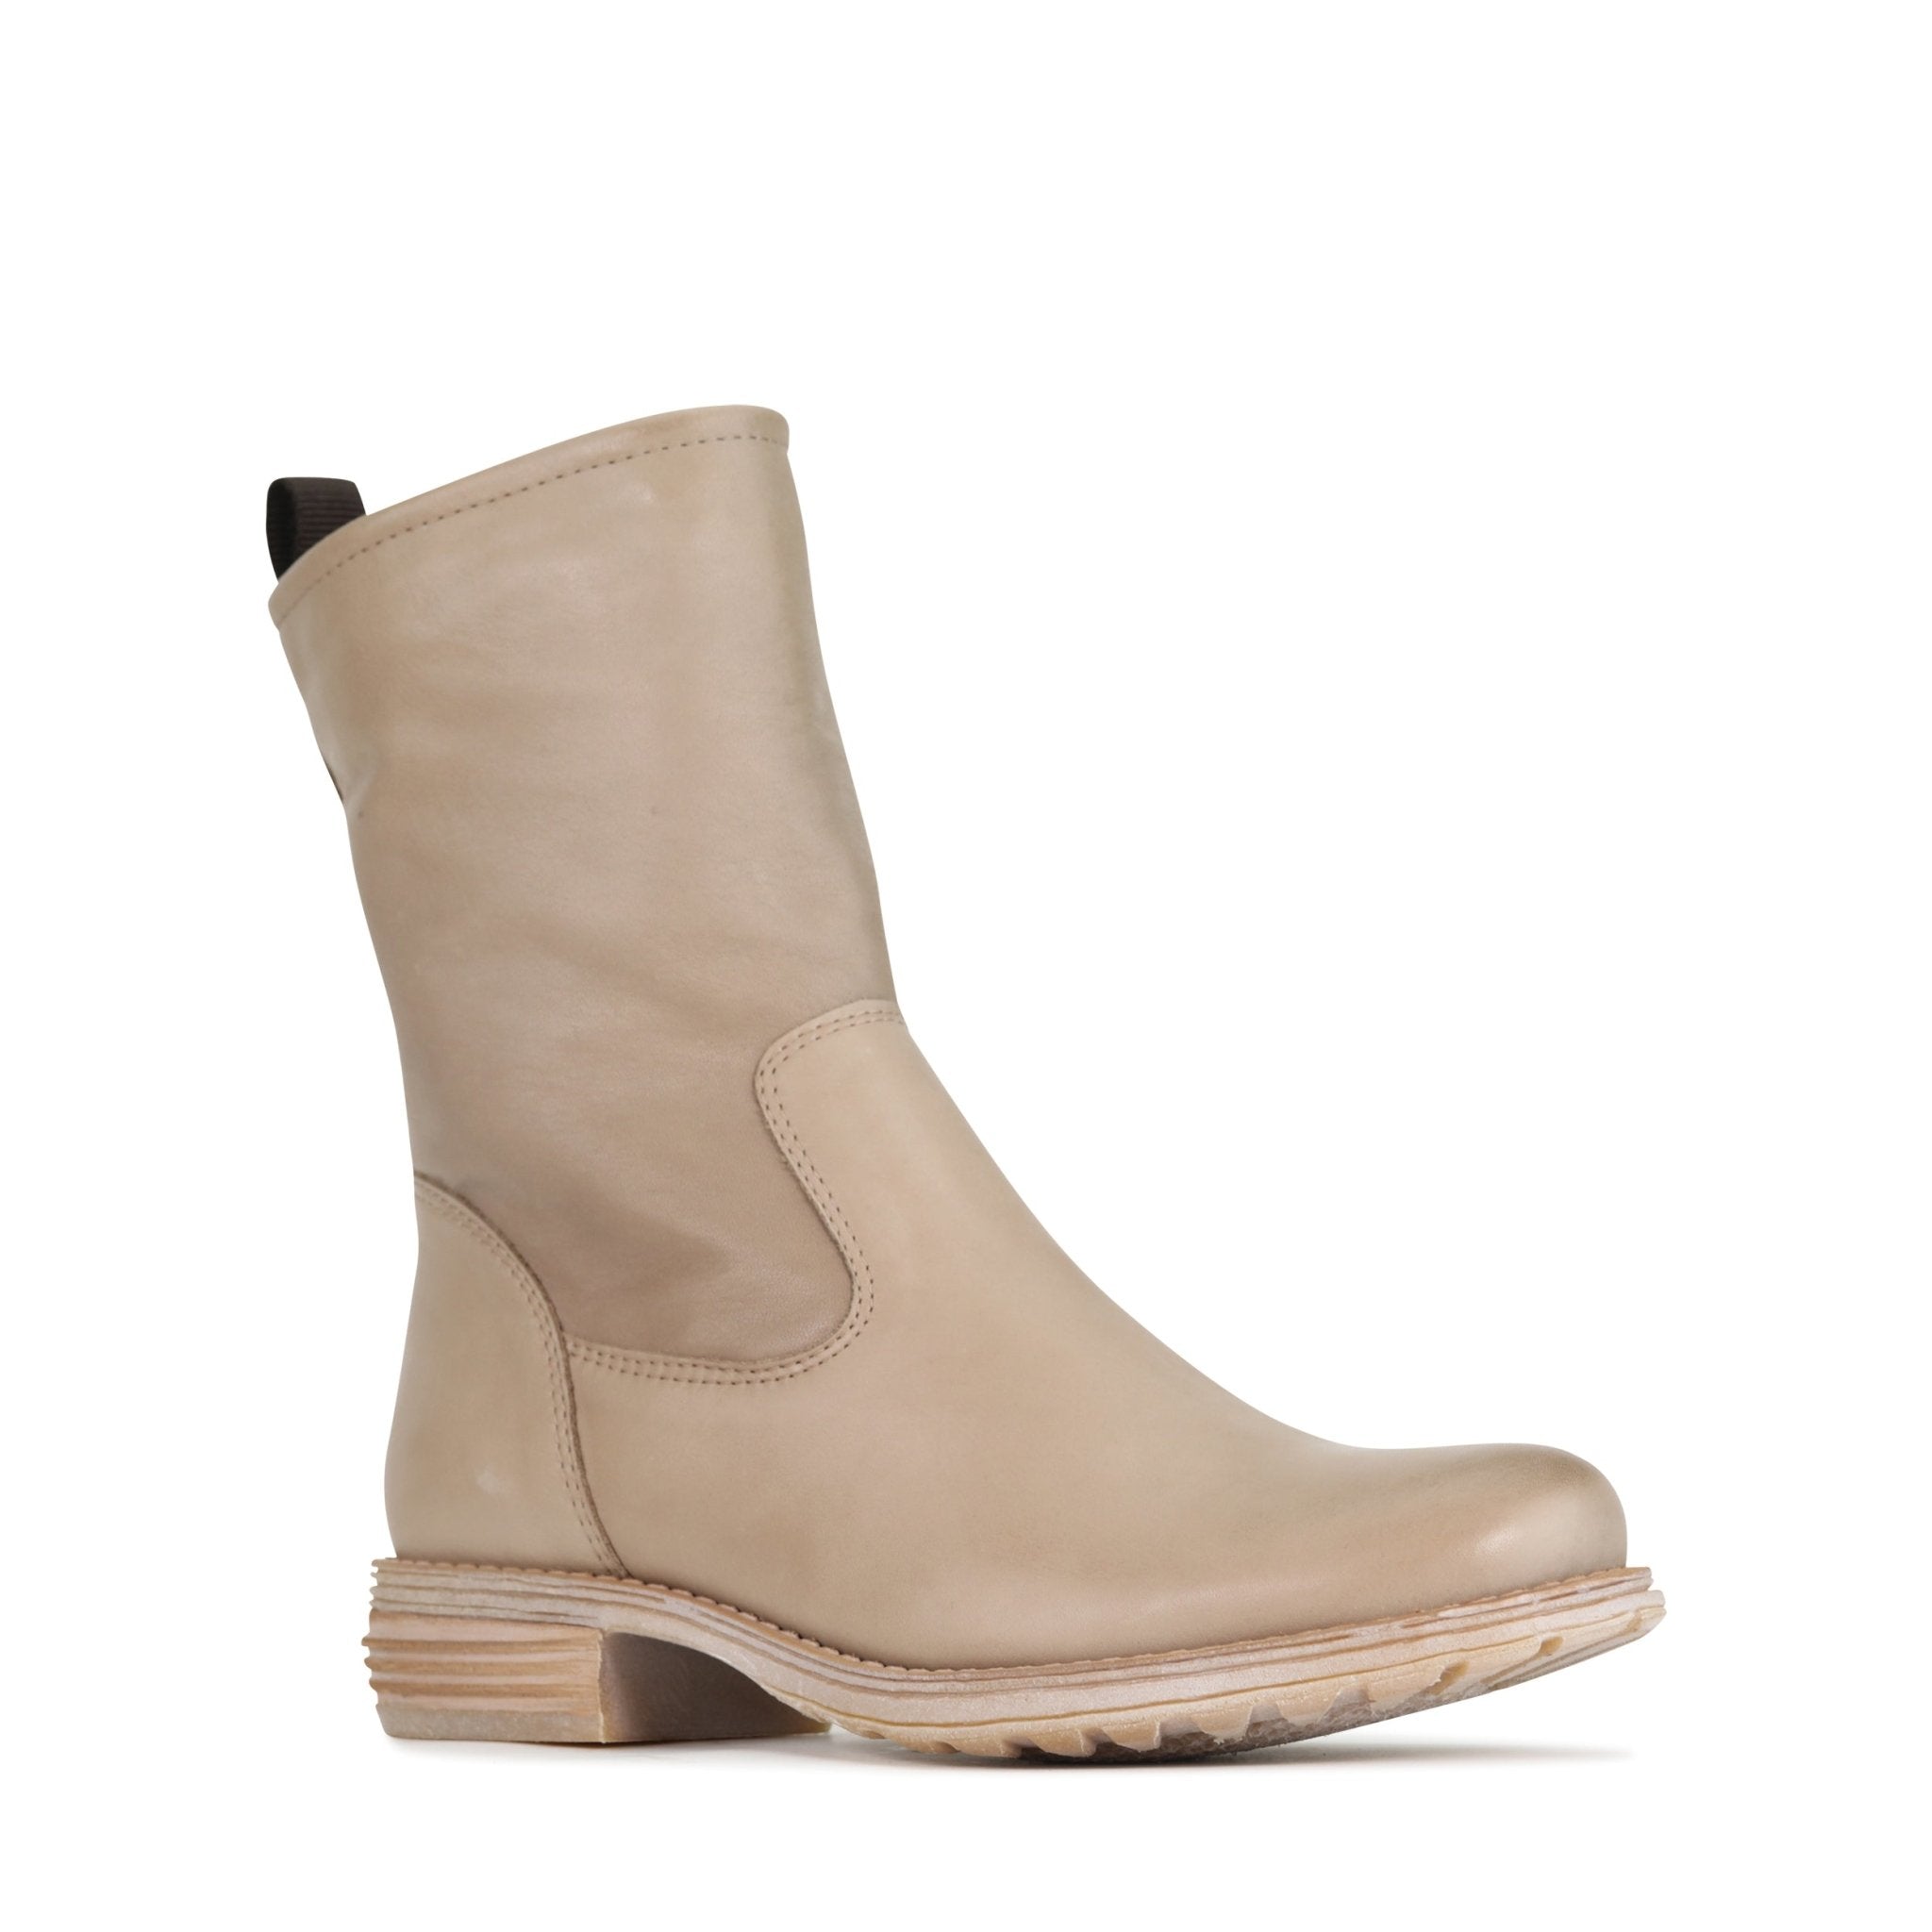 ZENIA - EOS Footwear - Ankle Boots #color_Taupe